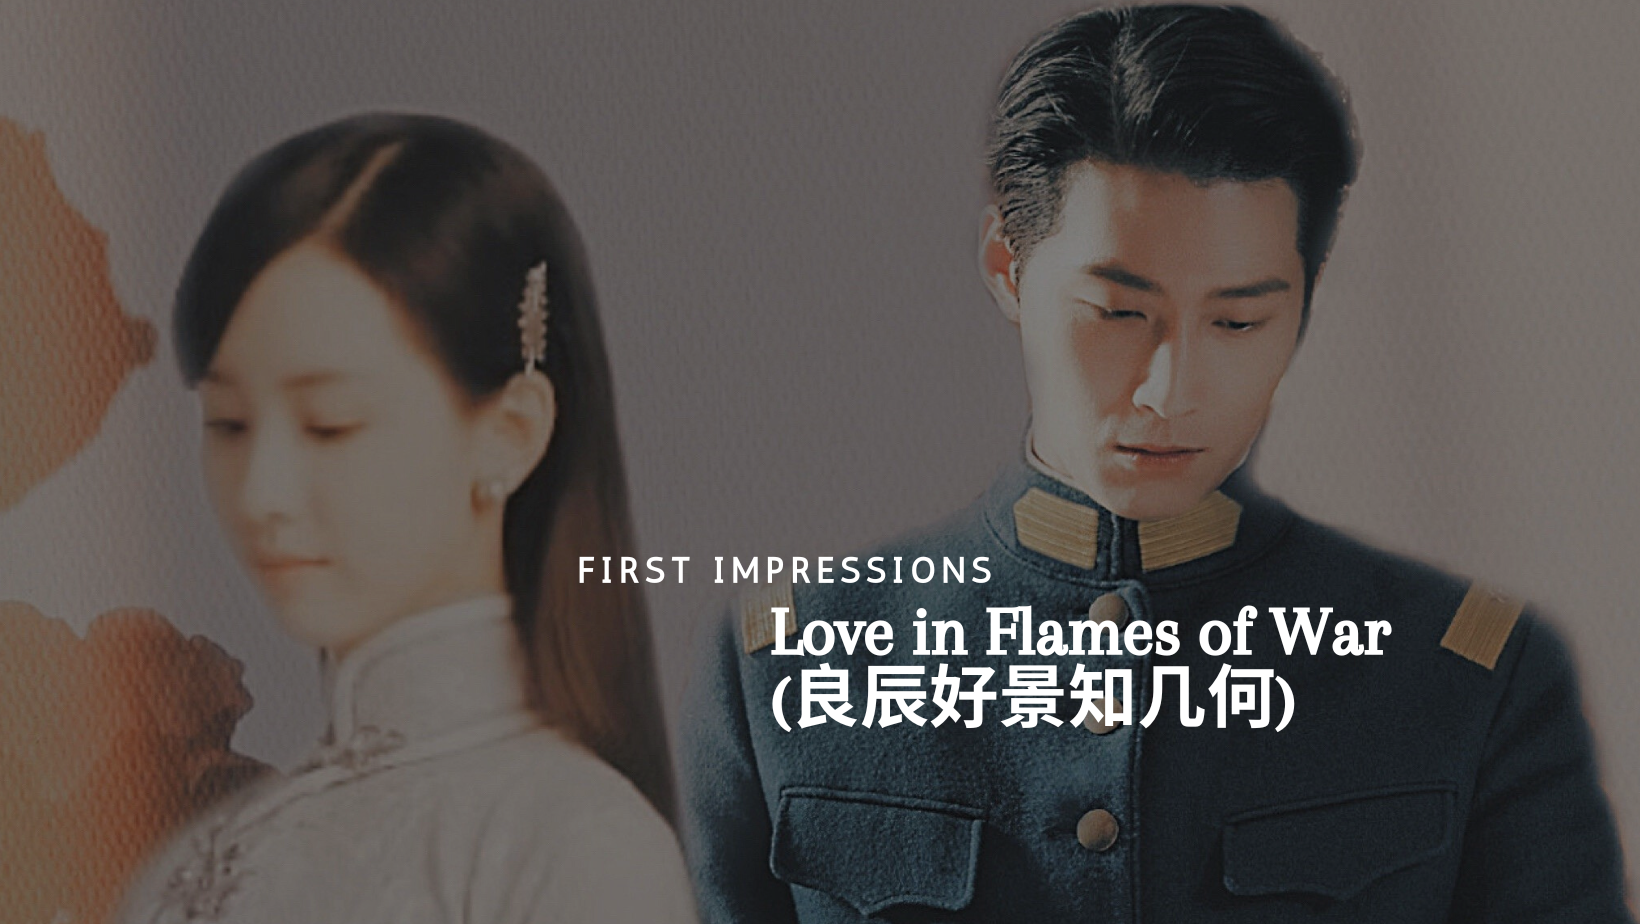 First Impressions: Love in Flames of War (良辰好景知几何) | Chinese Drama